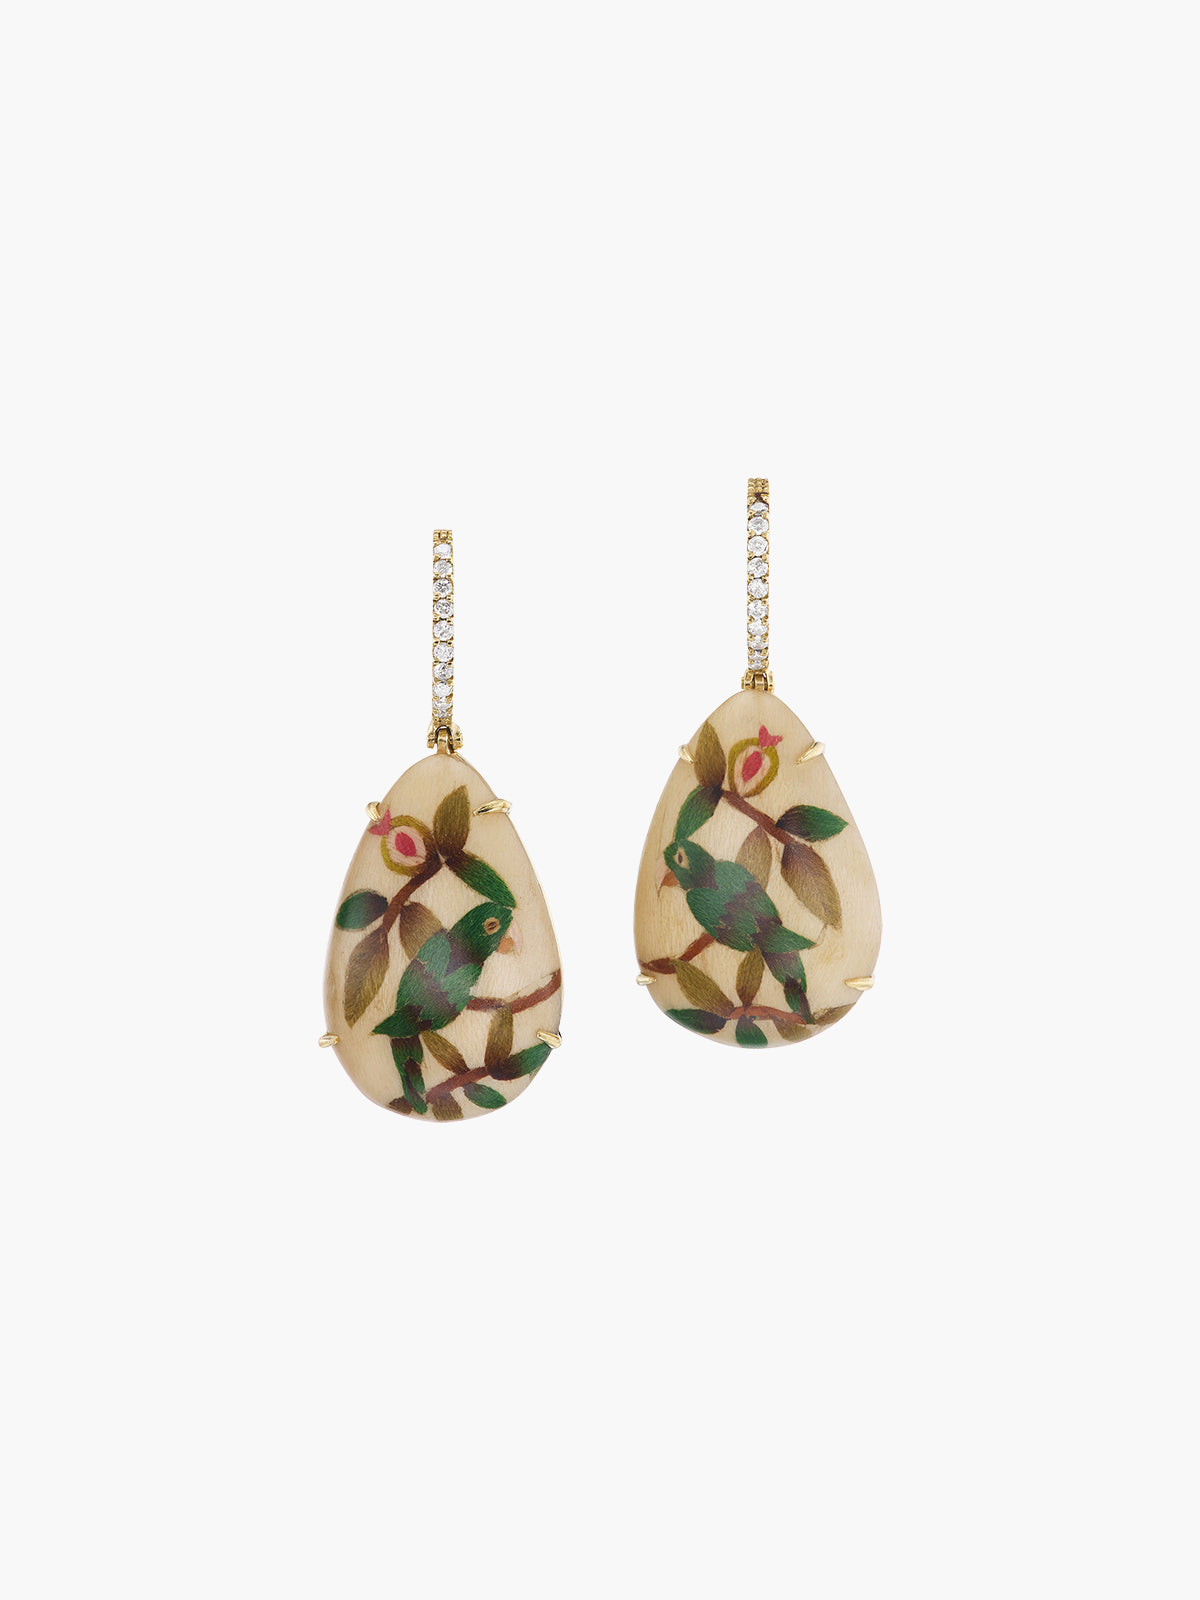 Drop Marquetry Earrings | Guava and Parrot on Cream Drop Marquetry Earrings | Guava and Parrot on Cream